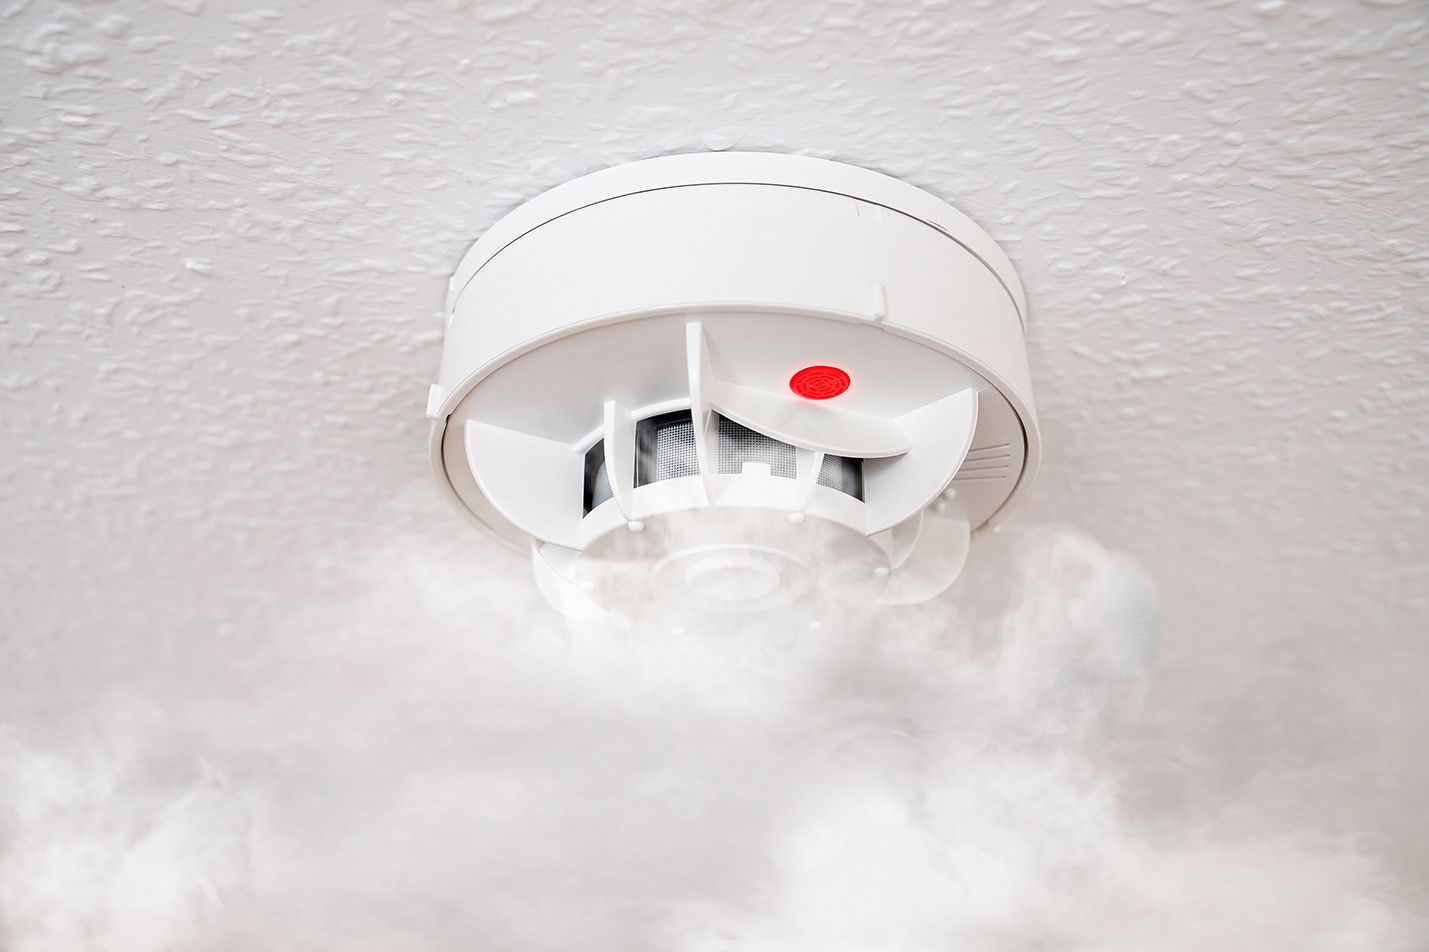 Why Does The Smoke Detector Go Off When Showering?